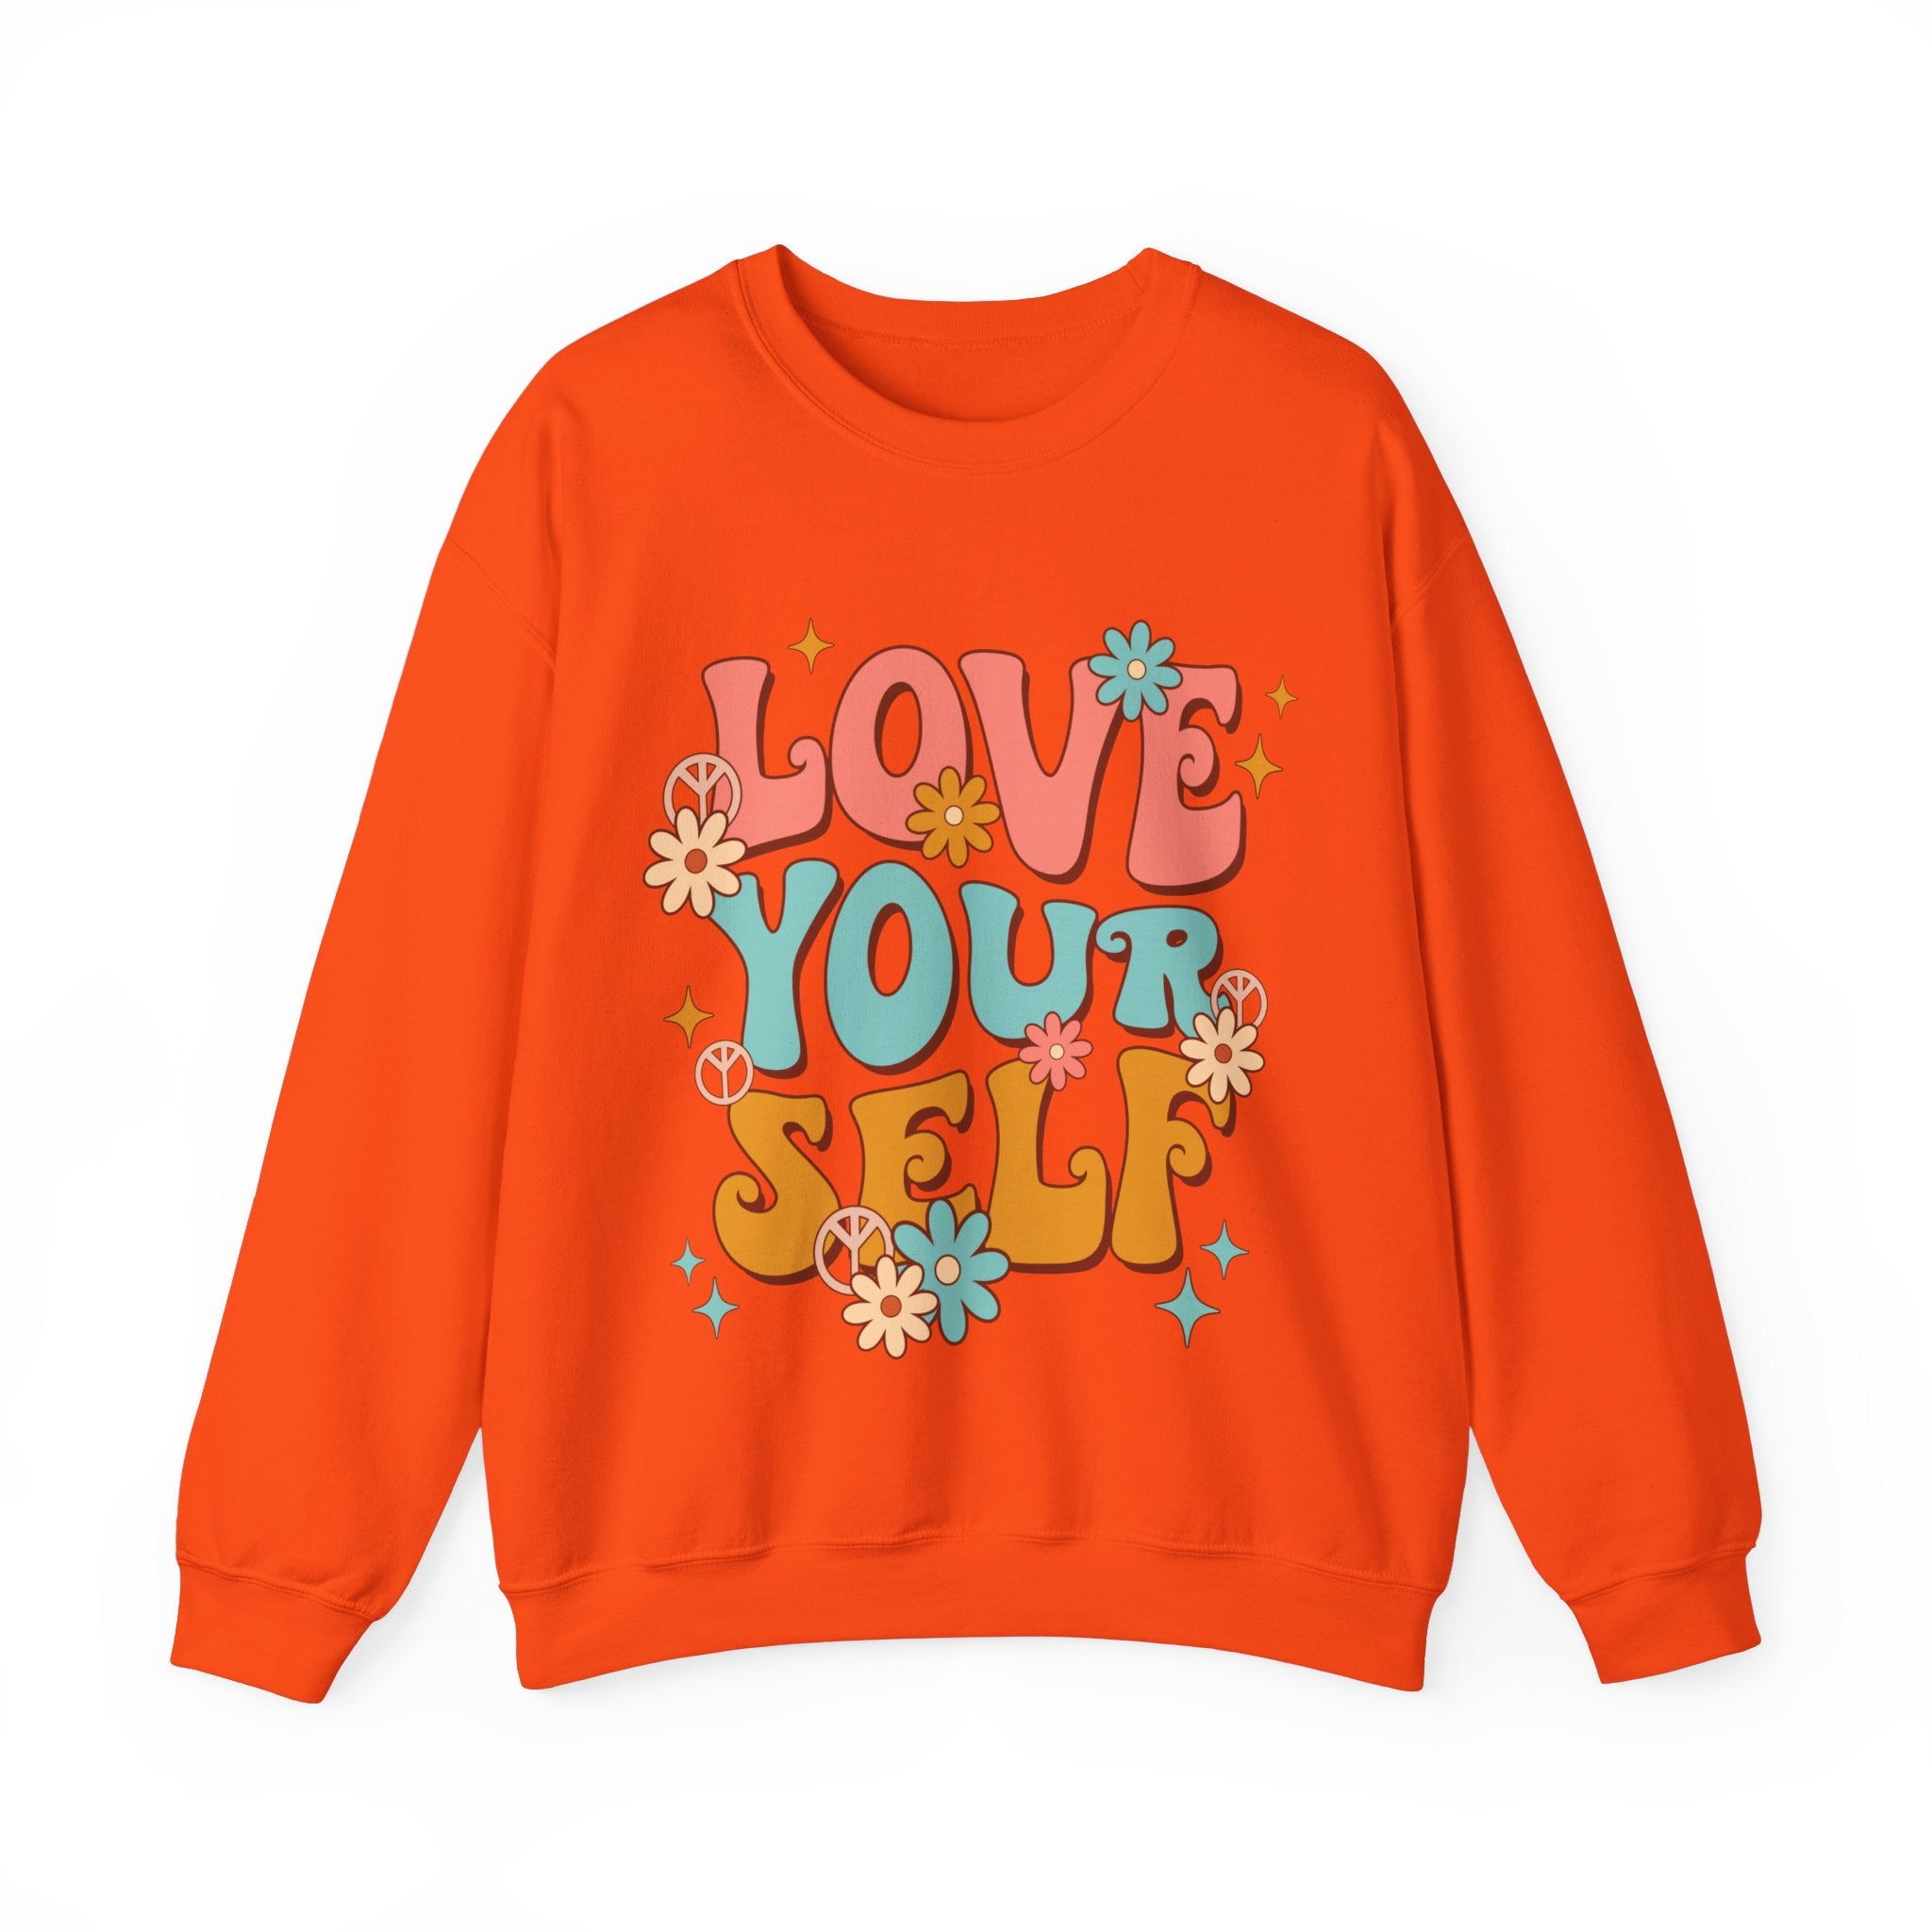 Love Yourself Crewneck - Smile Clothing